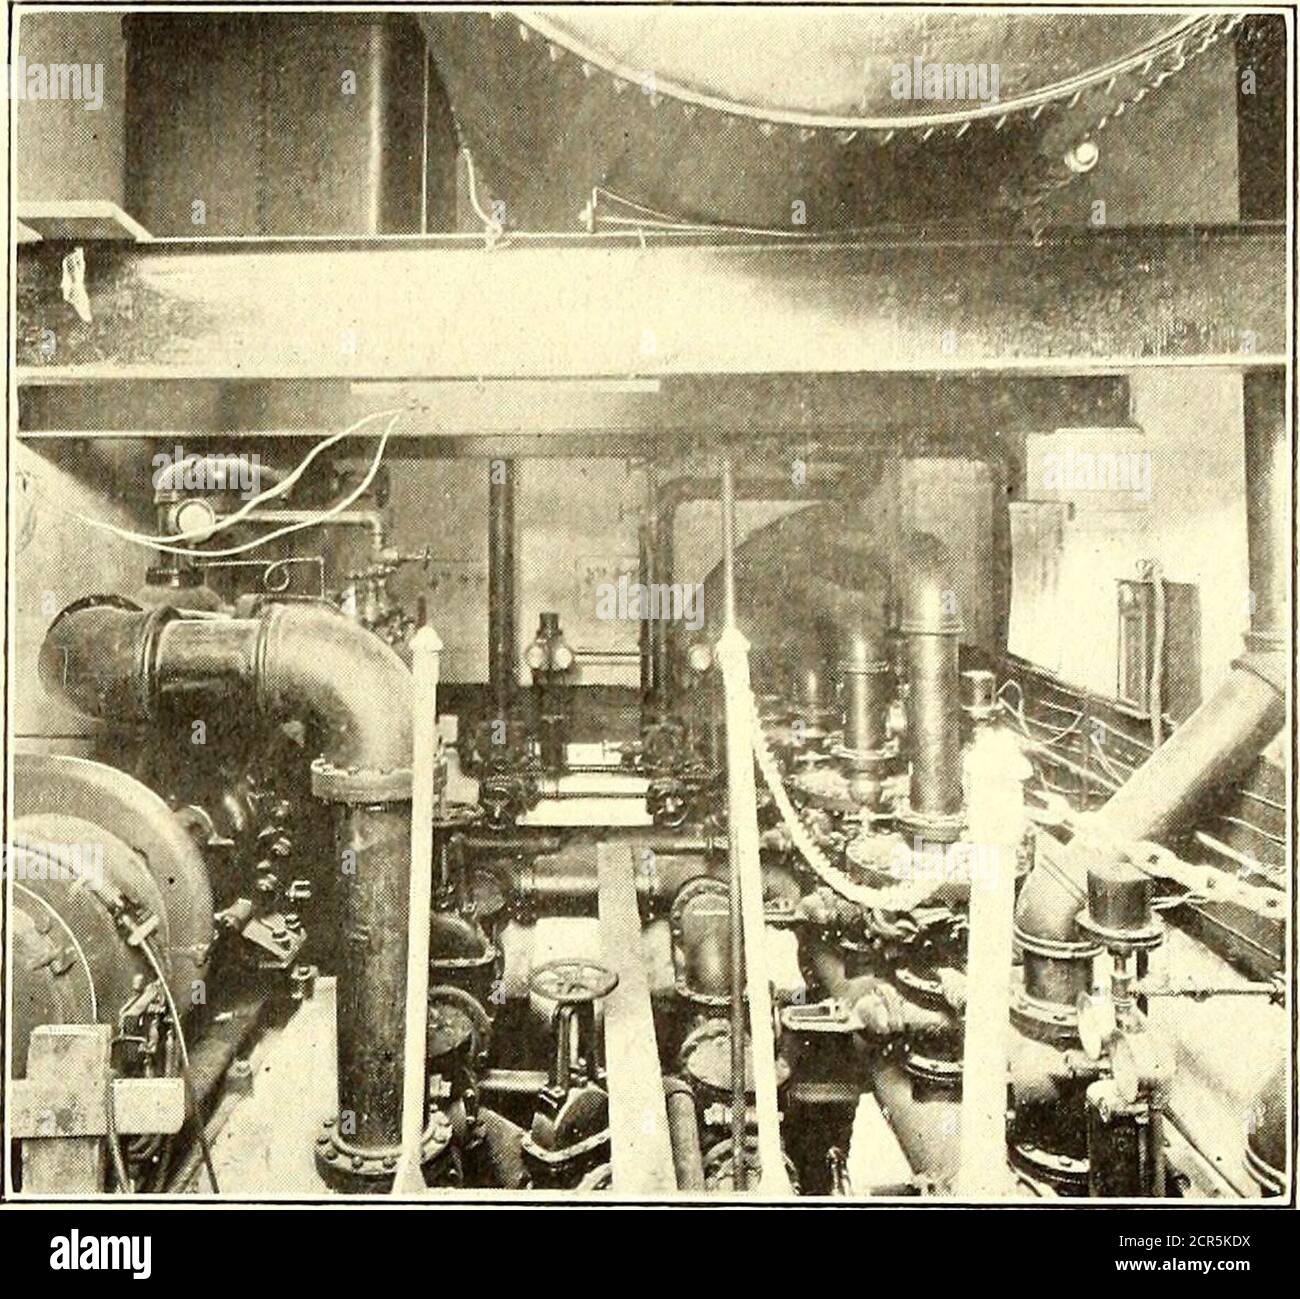 . Electric railway journal . Bridgeport Carhouse—Machine Shop Section on the First Floor hausters, one 150-lb. helve hammer, a combined punch andshear, and a babbitting furnace. The hammer and punchare driven by a shaft extended from the machine shop. The main machine shop has a 42-in. steel-tire wheel lathewith motor-operated tailstock, a 300-ton wheel press, a 200- boring mill, a double 12-in. emery grinder, a 30-in. automa-tic knife grinder and a magazine hack saw, all belt-drivenfrom a 15-hp motor. An overhead trolley rail carries a1-ton triplex hoist which serves the larger tools; in addi Stock Photo